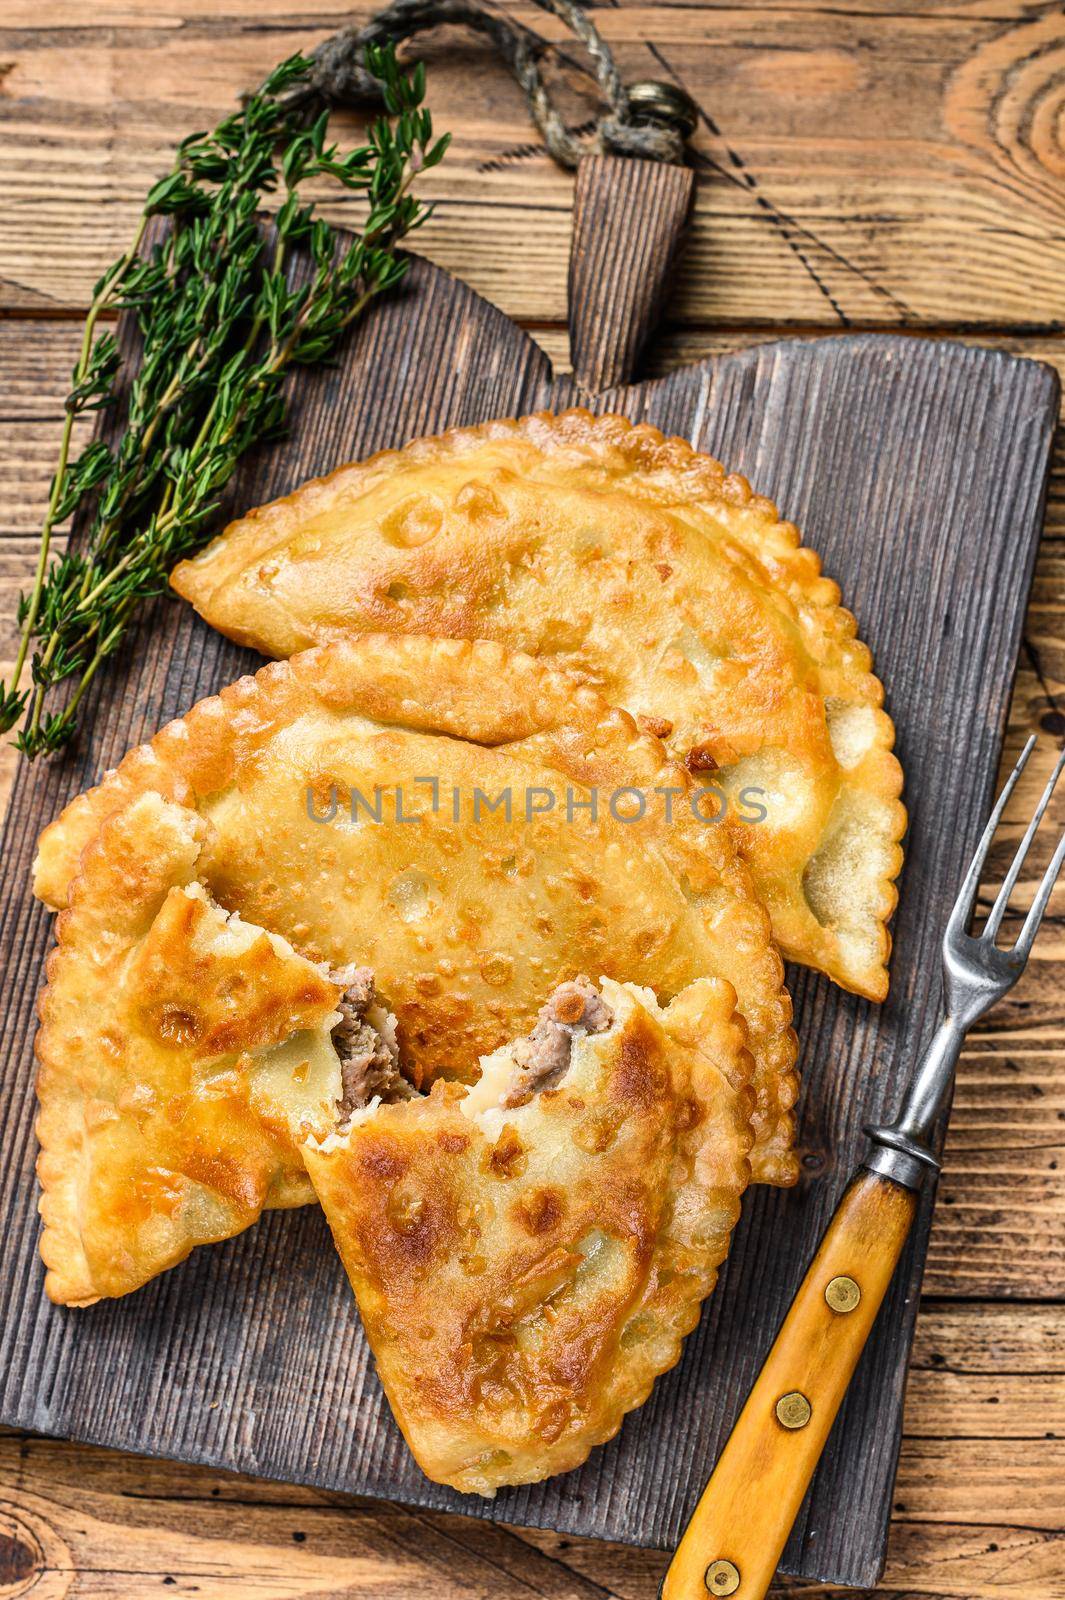 Chilean fried empanadas filled with minced beef meat served on a wooden cutting board. Wooden background. Top view.